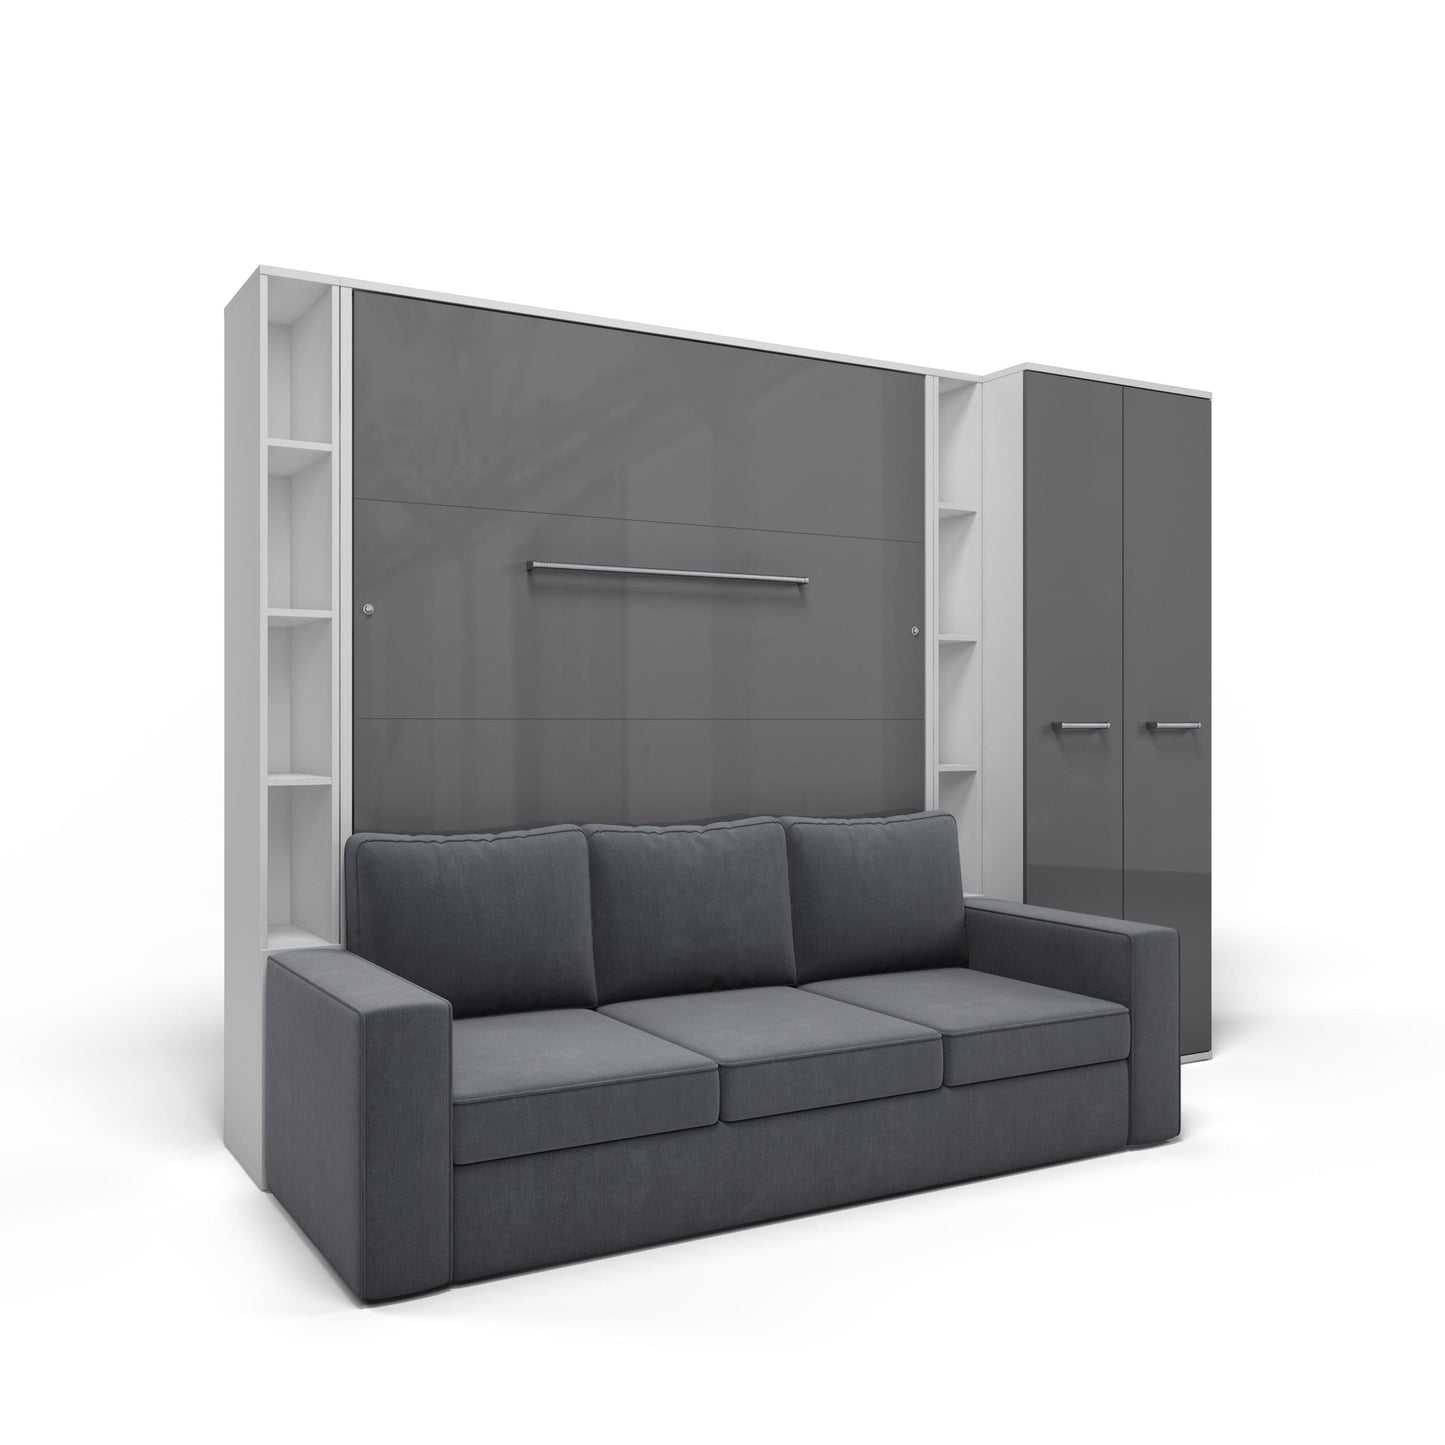 Maxima House Vertical Queen size Murphy Bed Invento with a Sofa, two Cabinets and Wardrobe White/Grey + Grey IN014/23/24WG-G